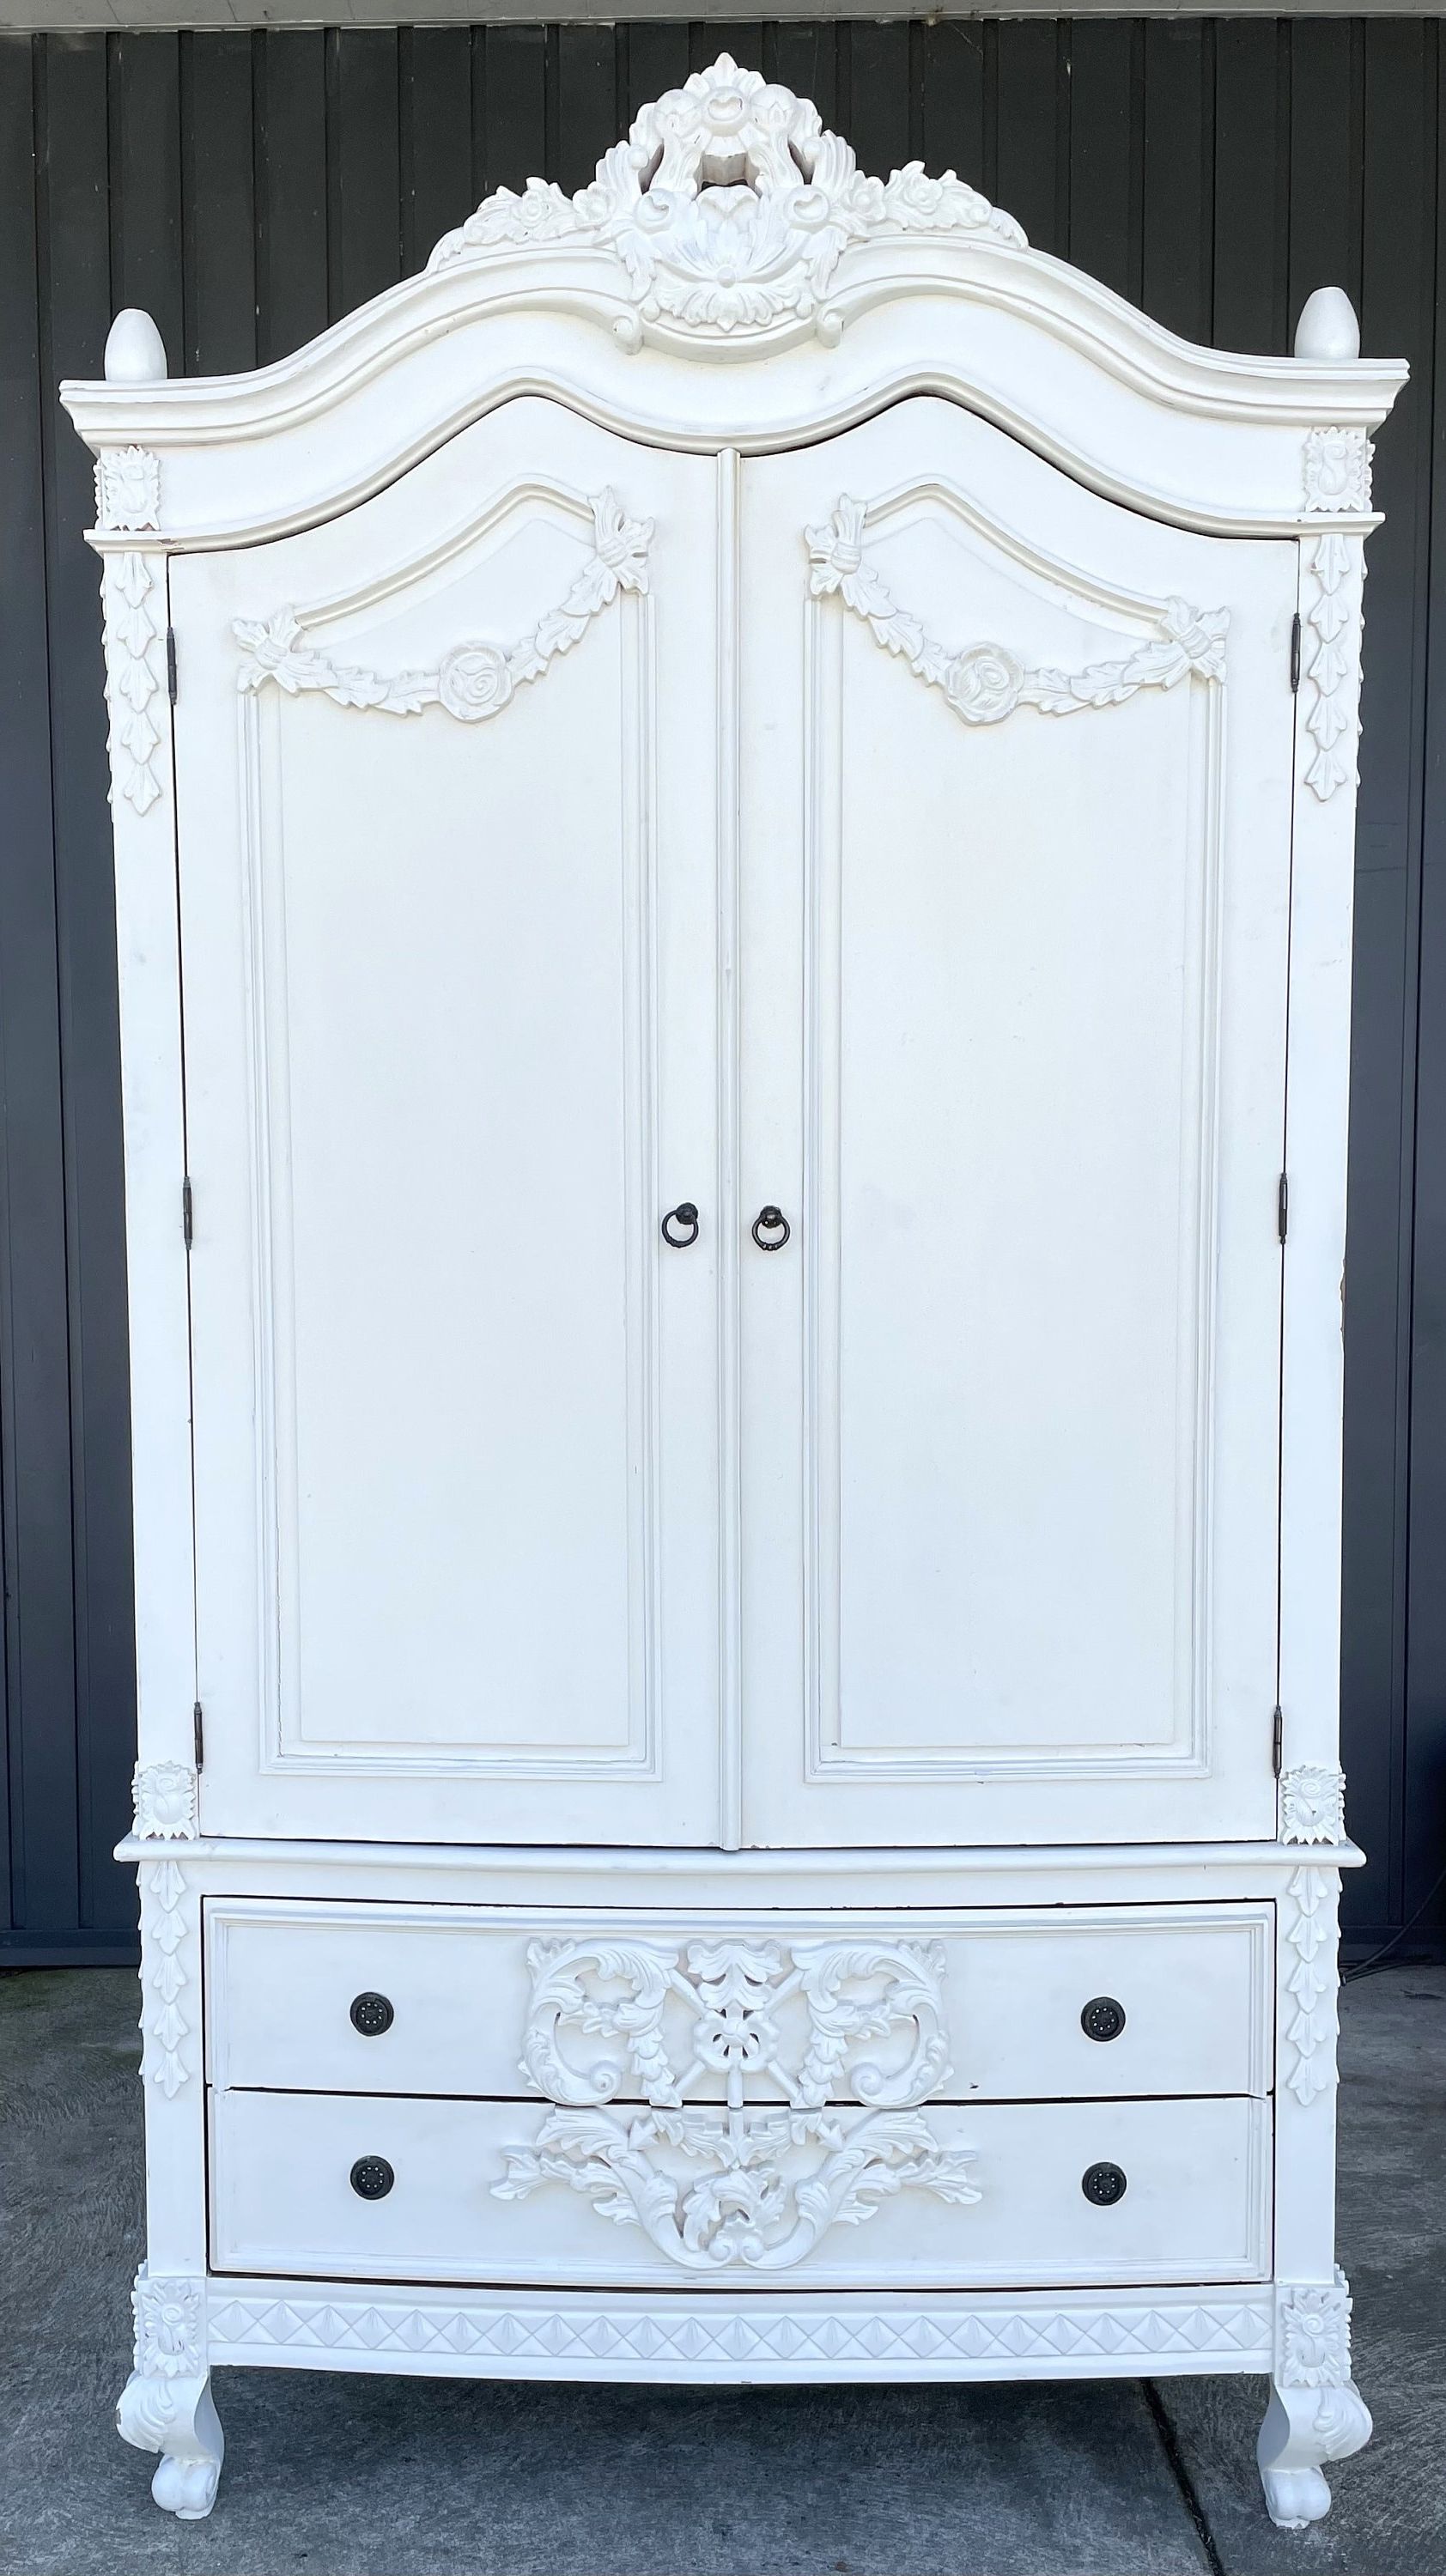 Shabby Chic Distressed White Vintage Style French Baroque – Etsy Pertaining To White French Armoire Wardrobes (View 5 of 20)